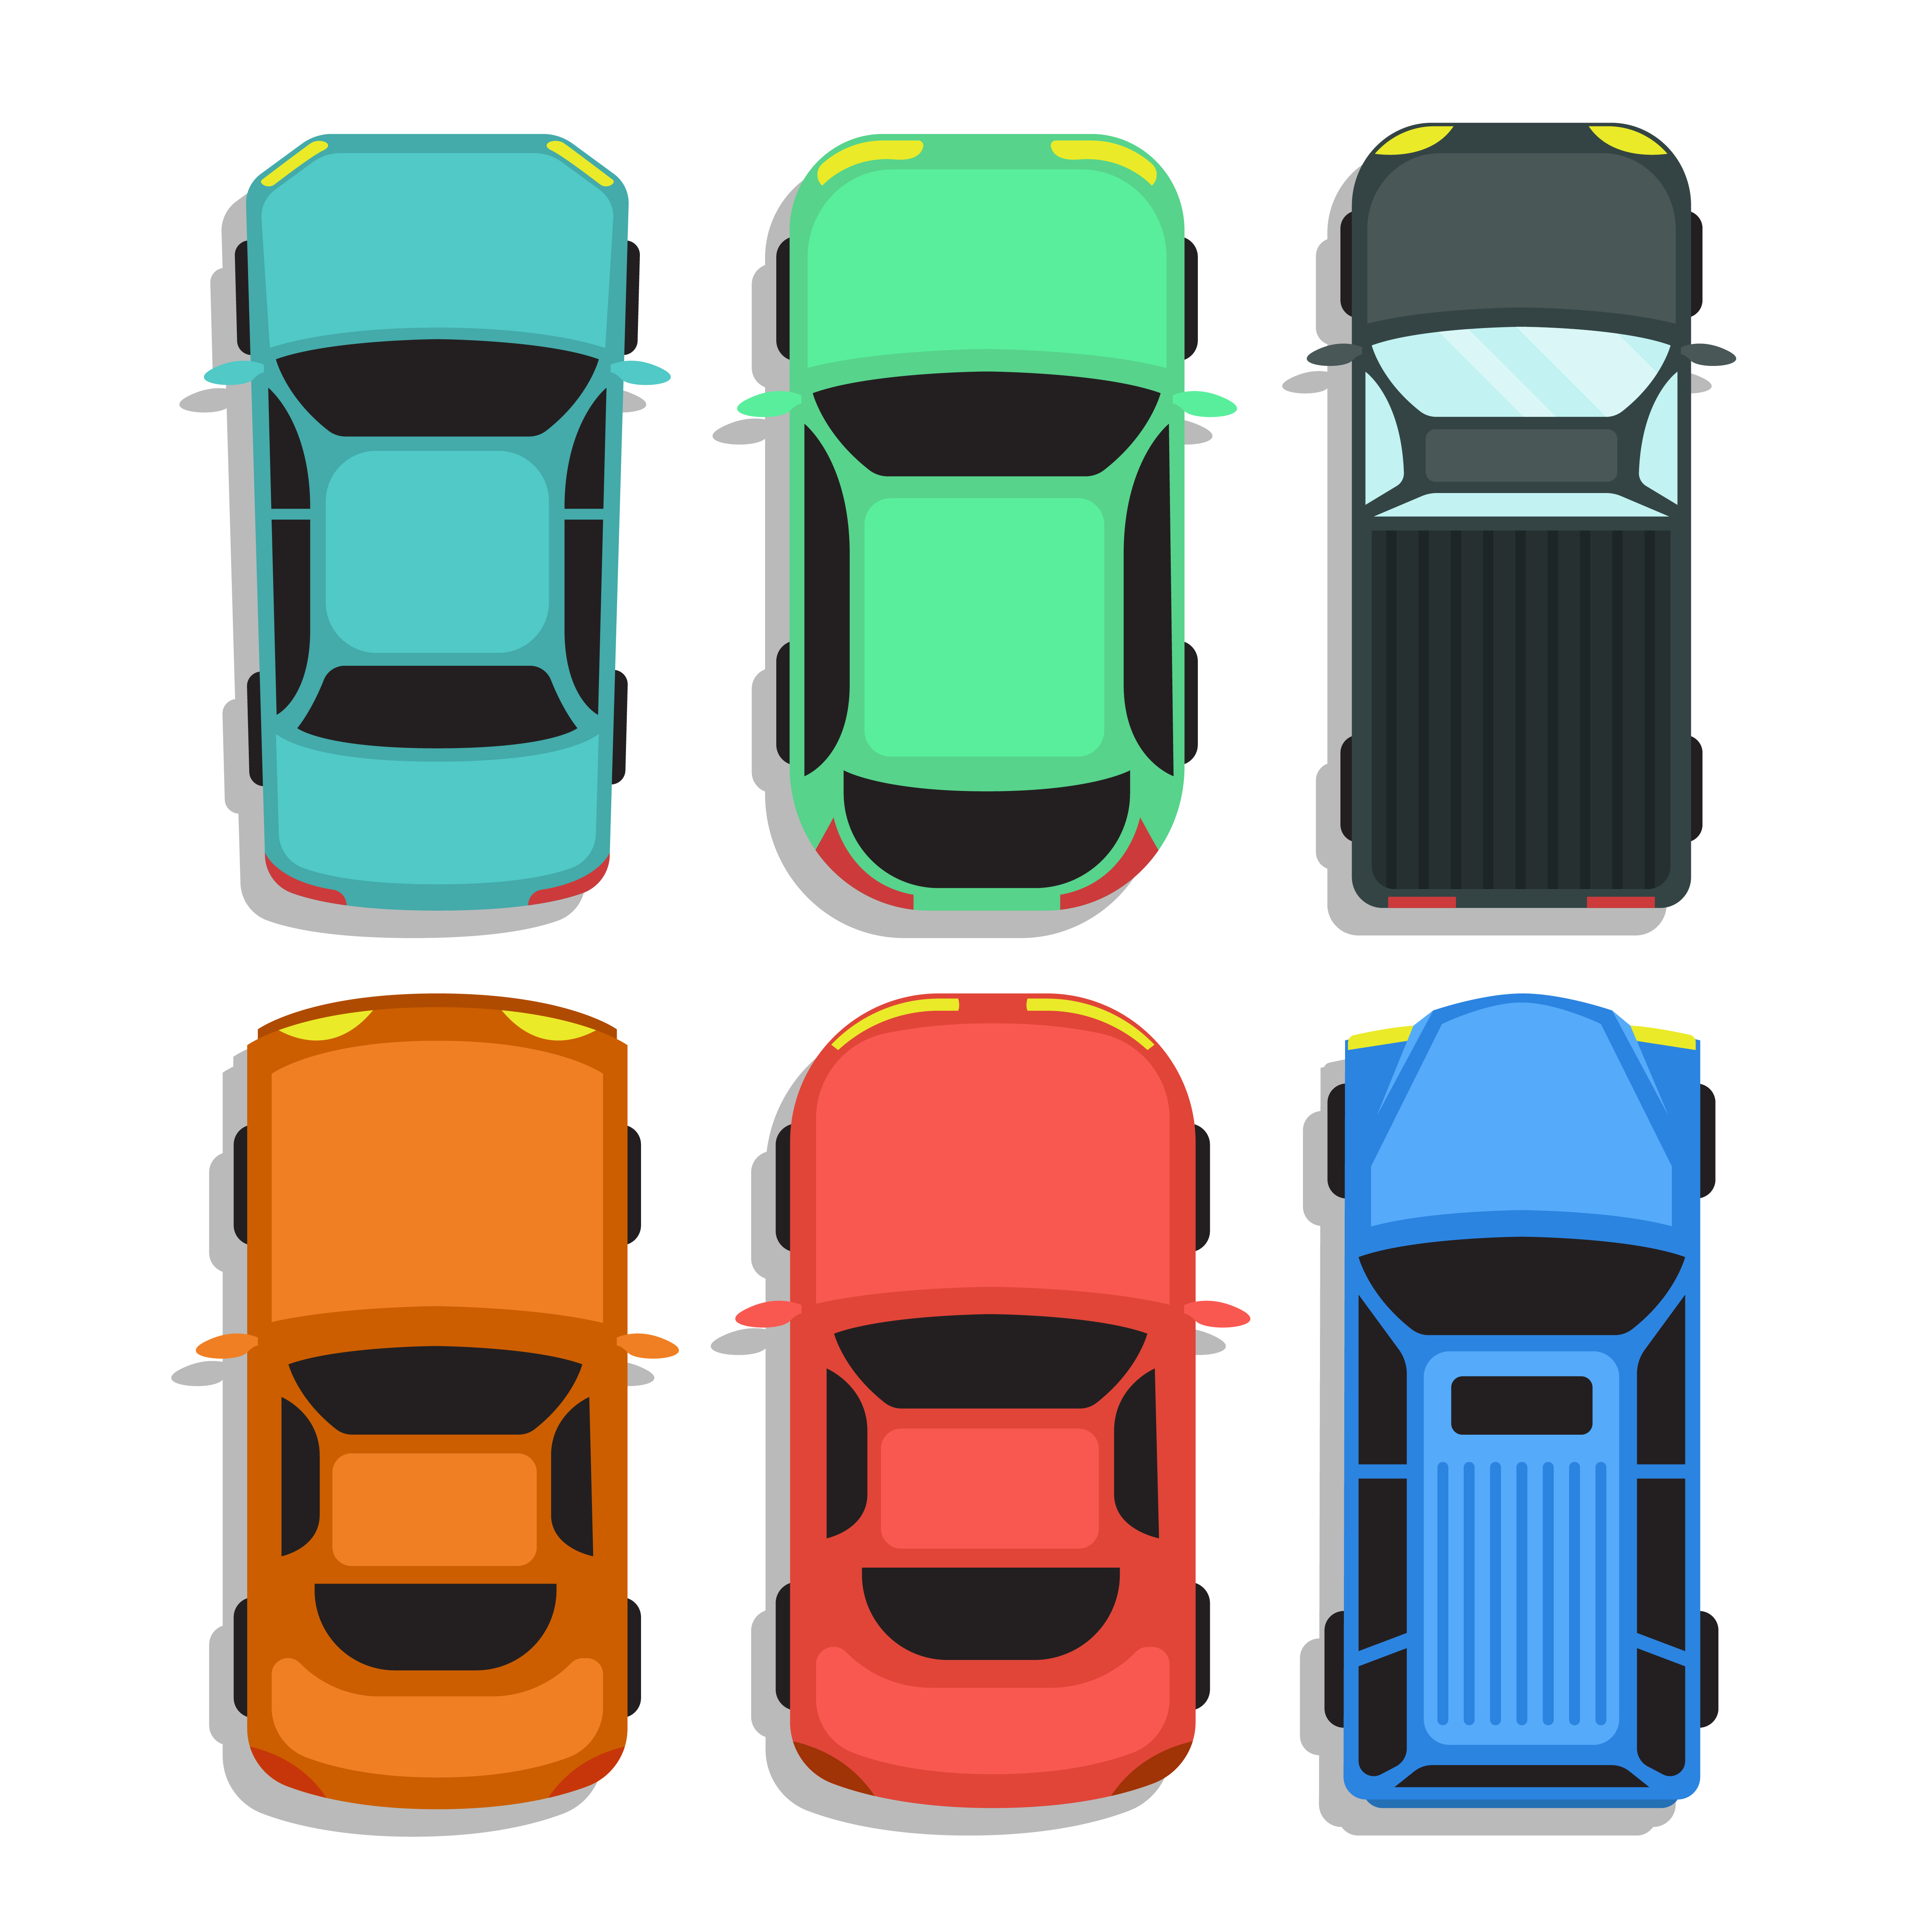 dynasti besøgende Isaac Car Icon Top View Vector Art, Icons, and Graphics for Free Download